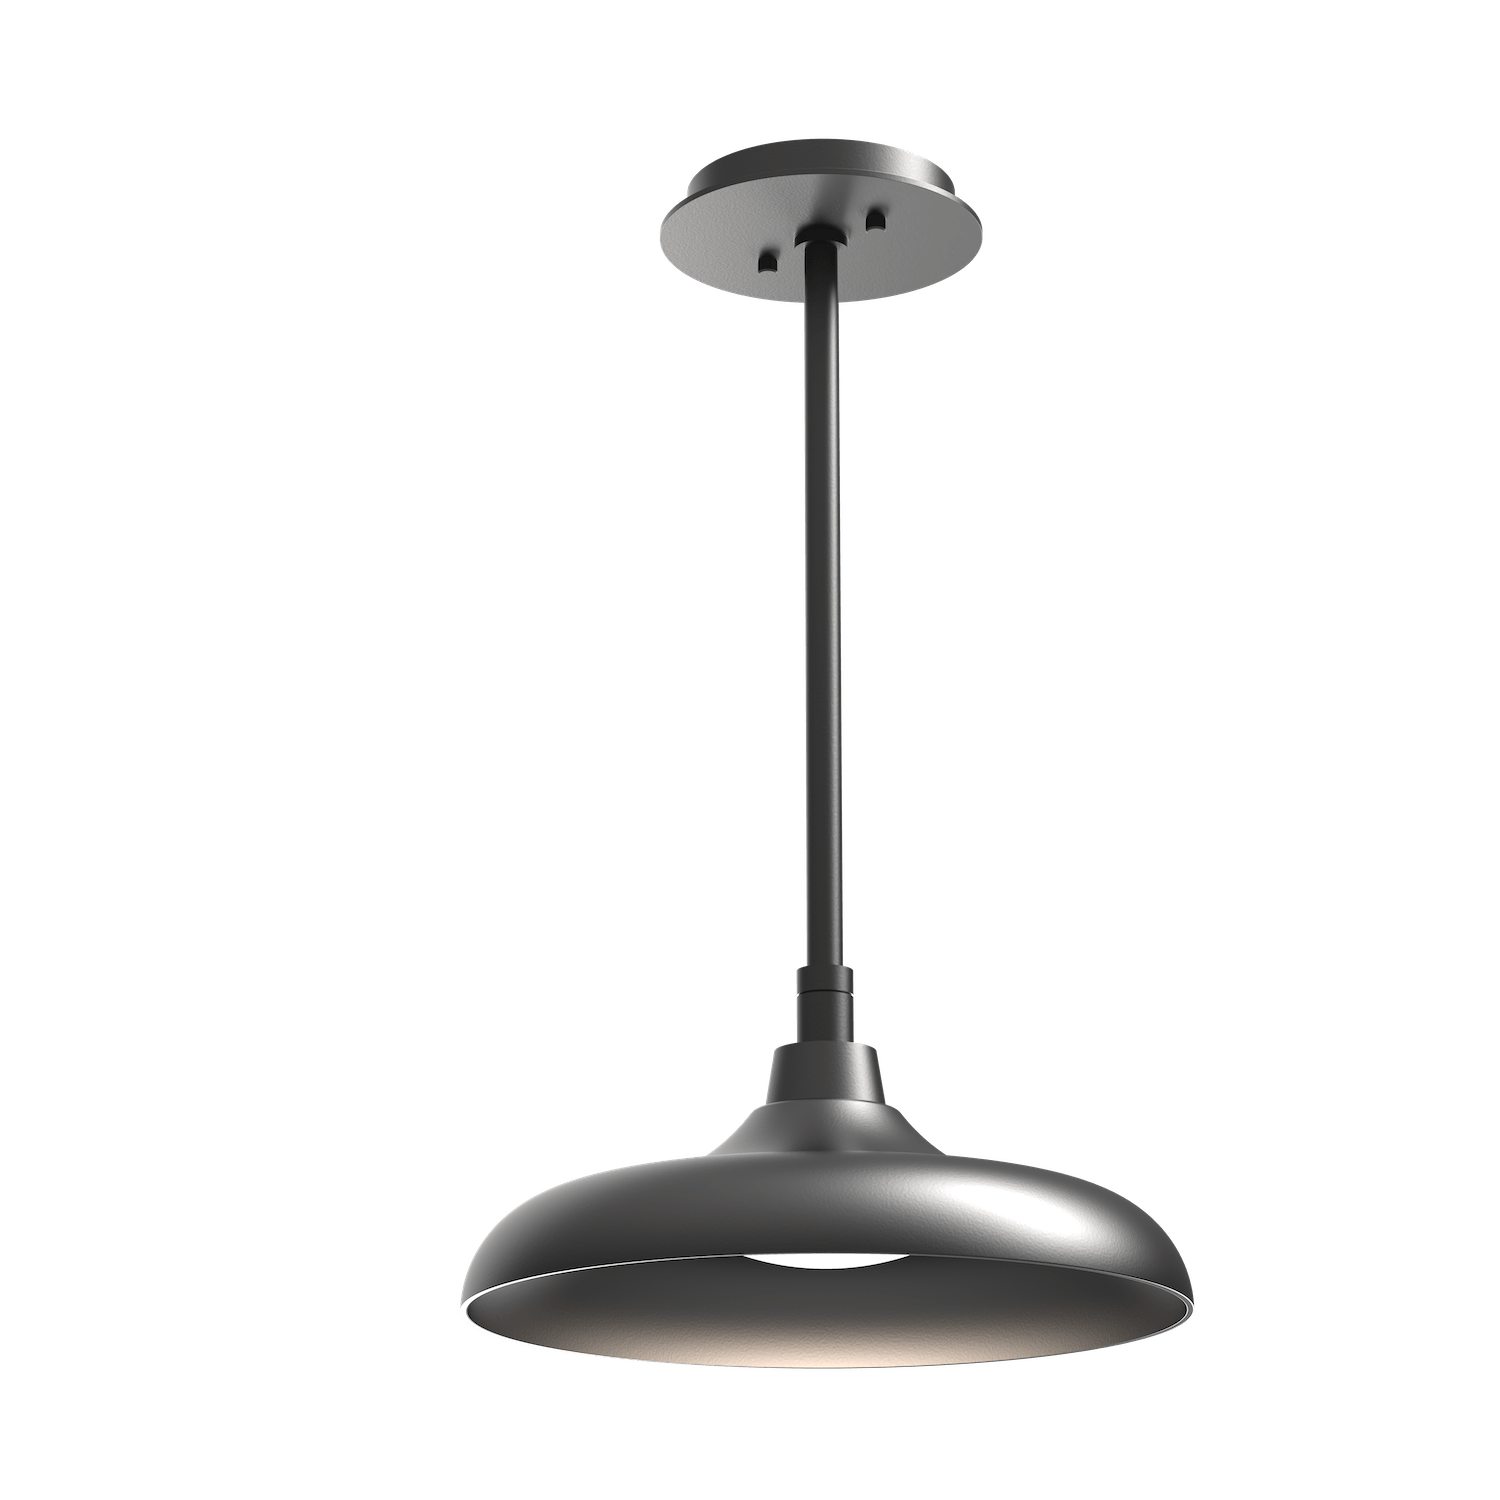 OPB0074-01-AG-O-Hammerton-Studio-Ranch-12-inch-outdoor-pendant-light-with-argento-grey-finish-and-frosted-glass-shade-and-LED-lamping